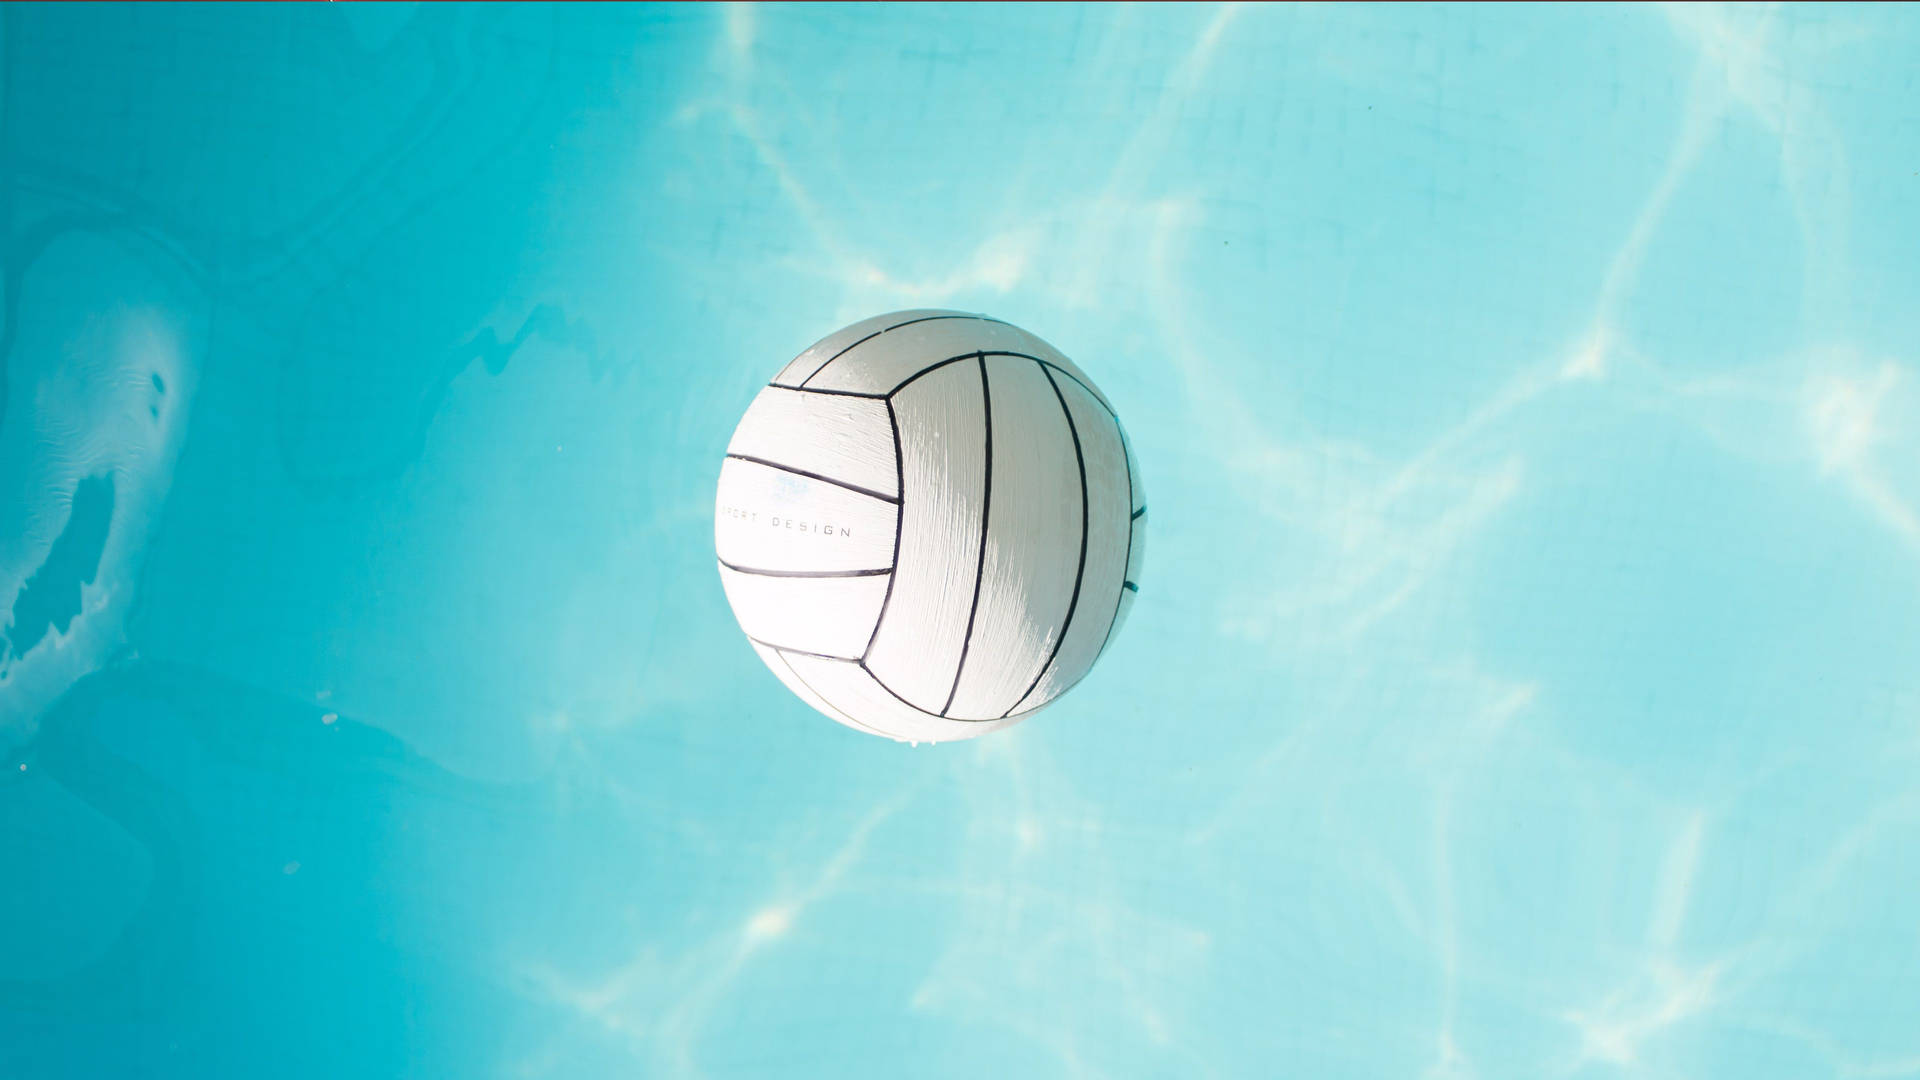 5120X2880 Volleyball Wallpaper and Background